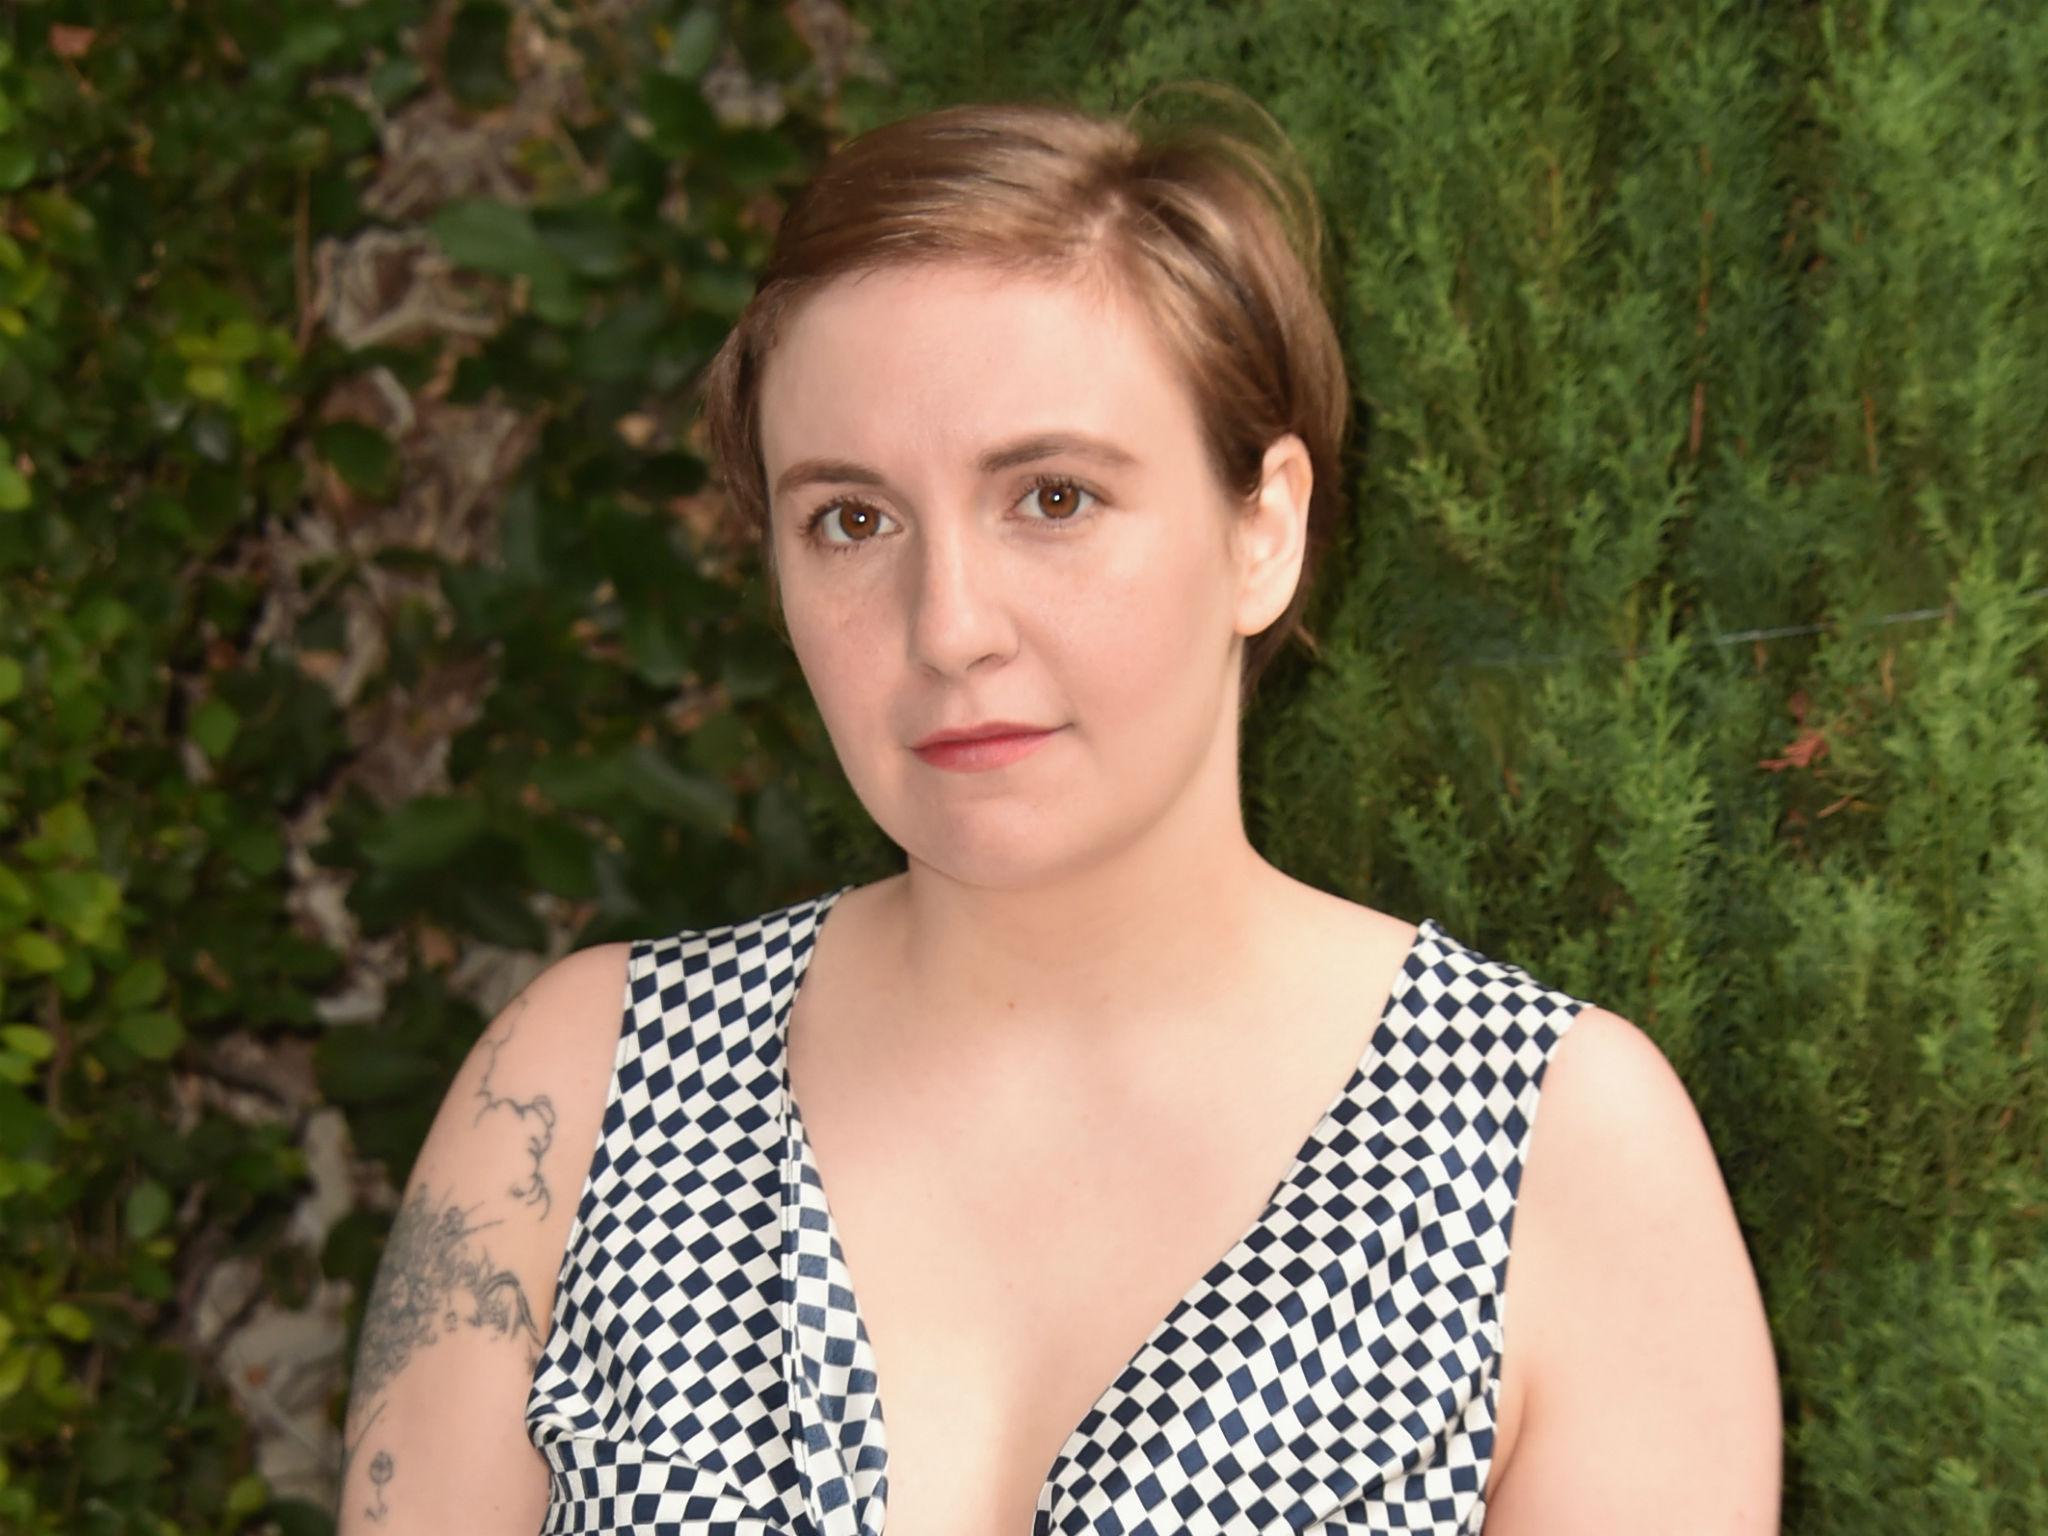 Stanford rape case Lena Dunham and the cast of Girls dedicate video message to survivor The Independent The Independent hq nude picture